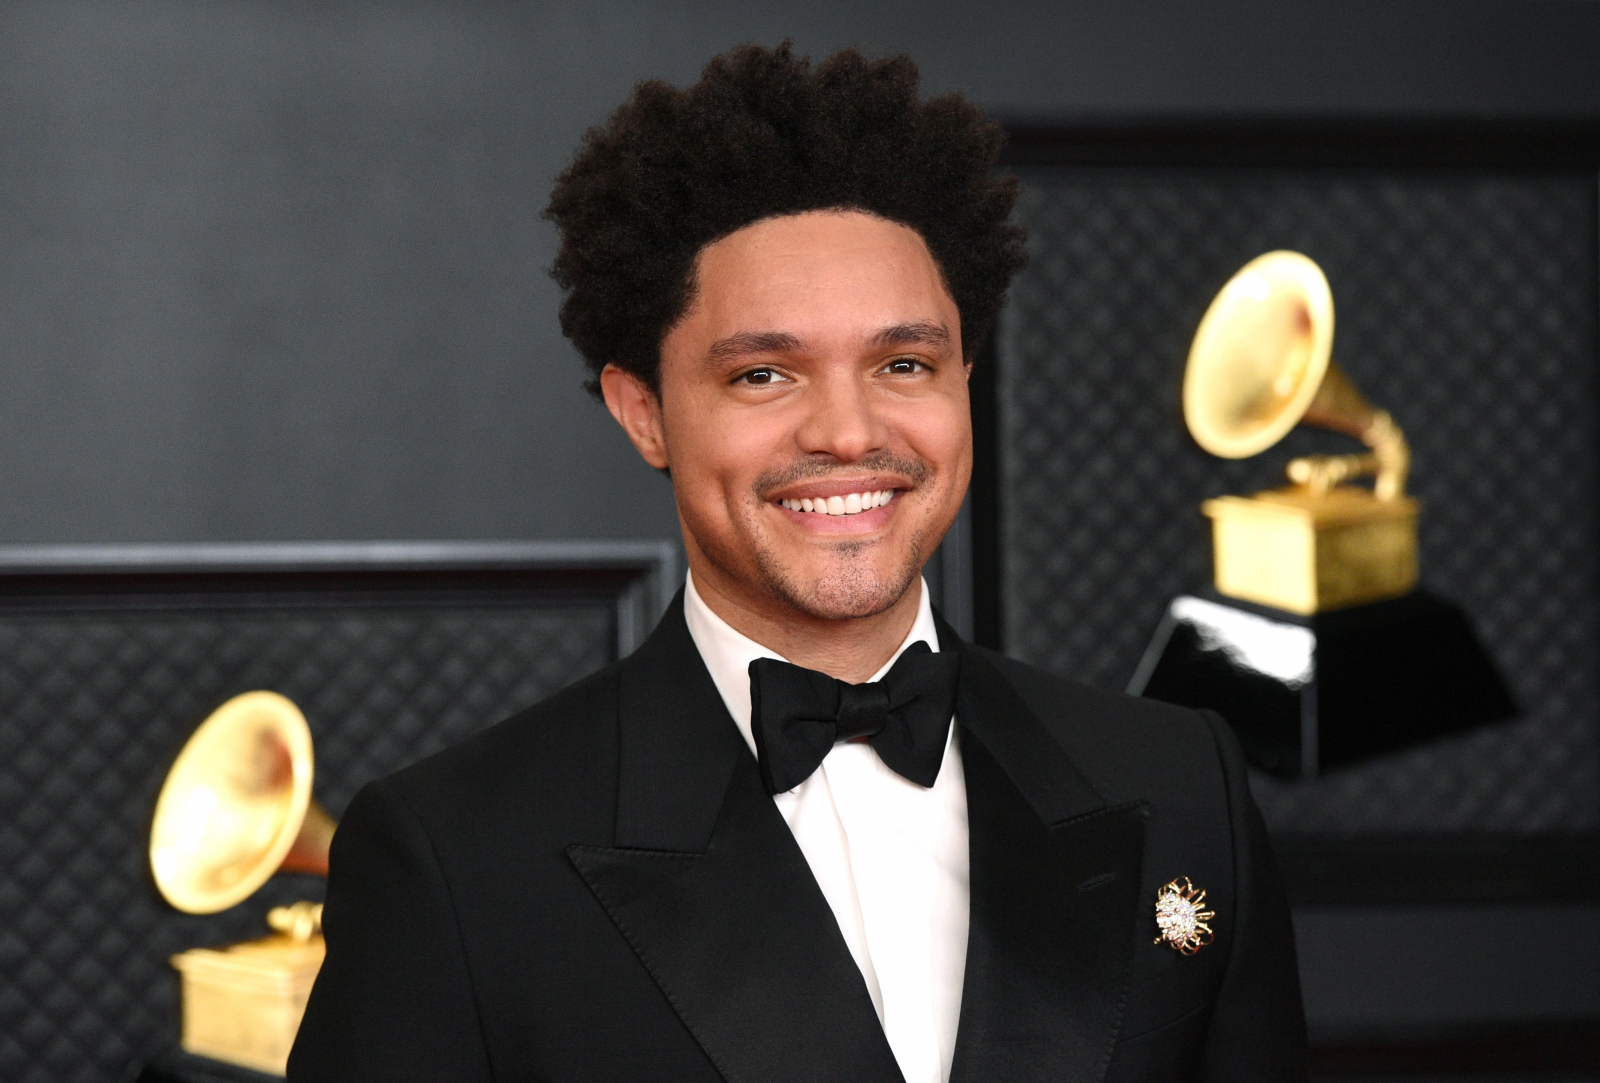 Crude and Unfunny! Trevor Noah Slammed For Comparing Grammys 2021 to US